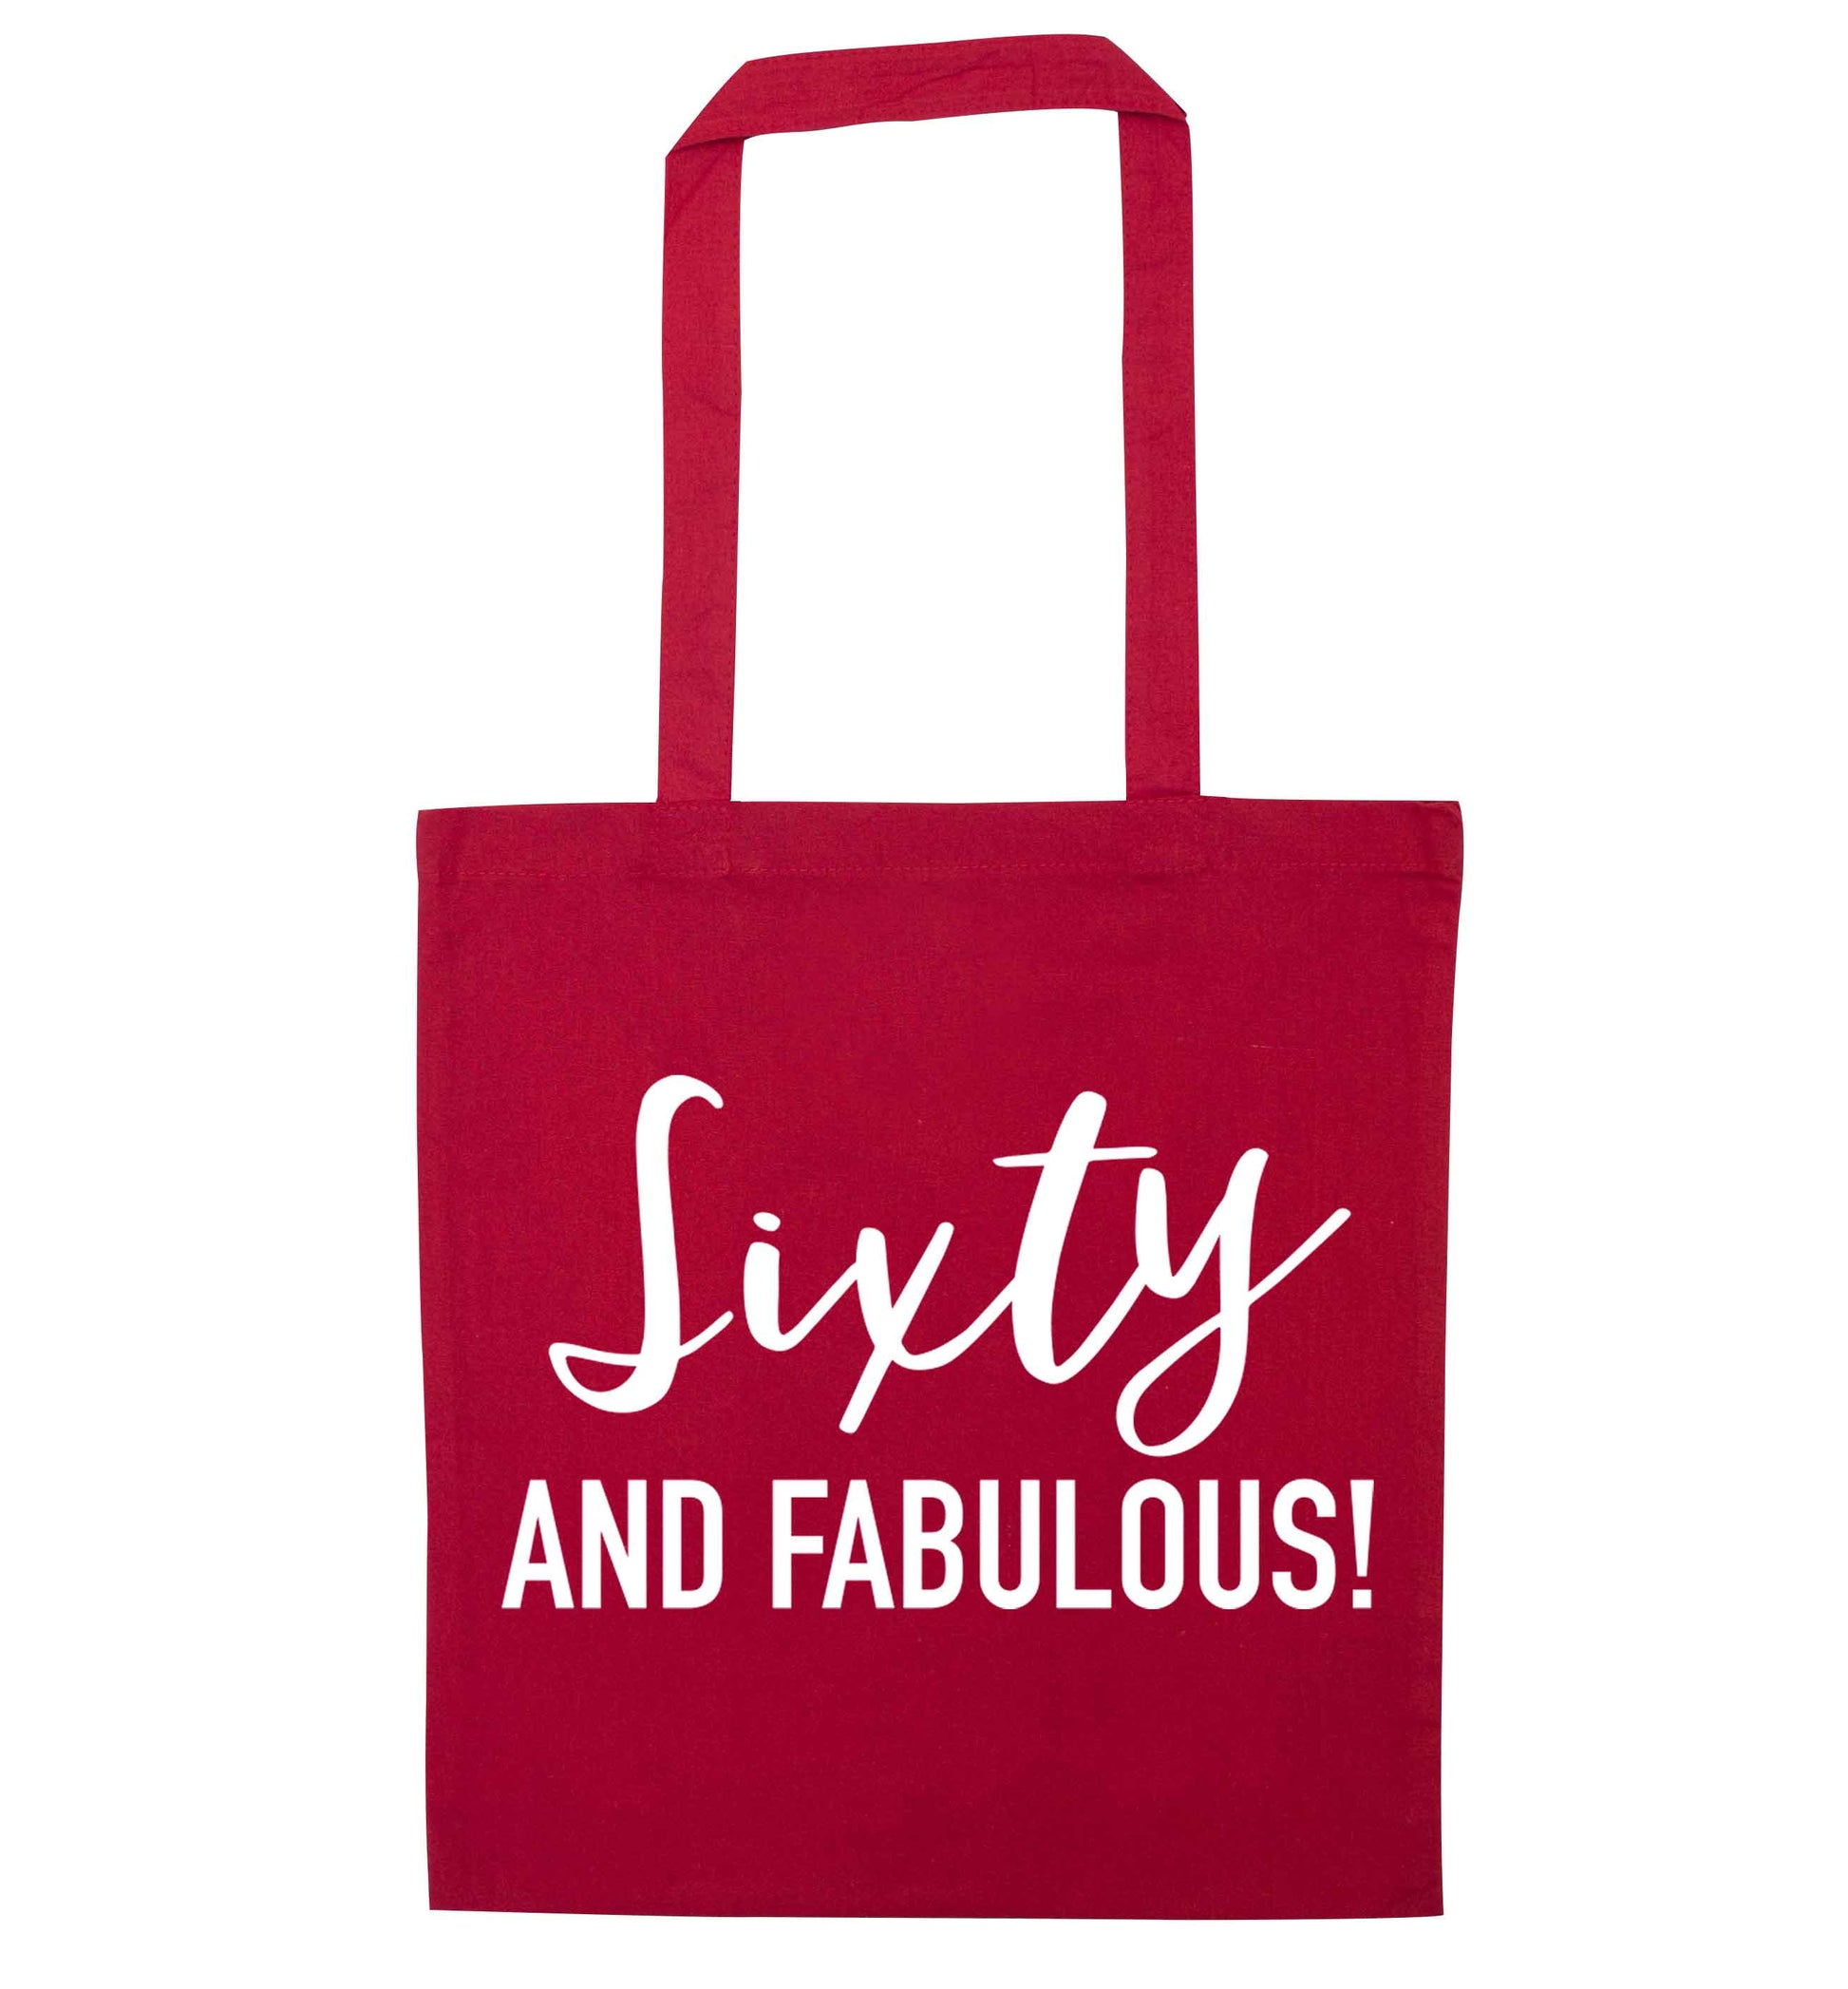 Sixty and fabulous red tote bag